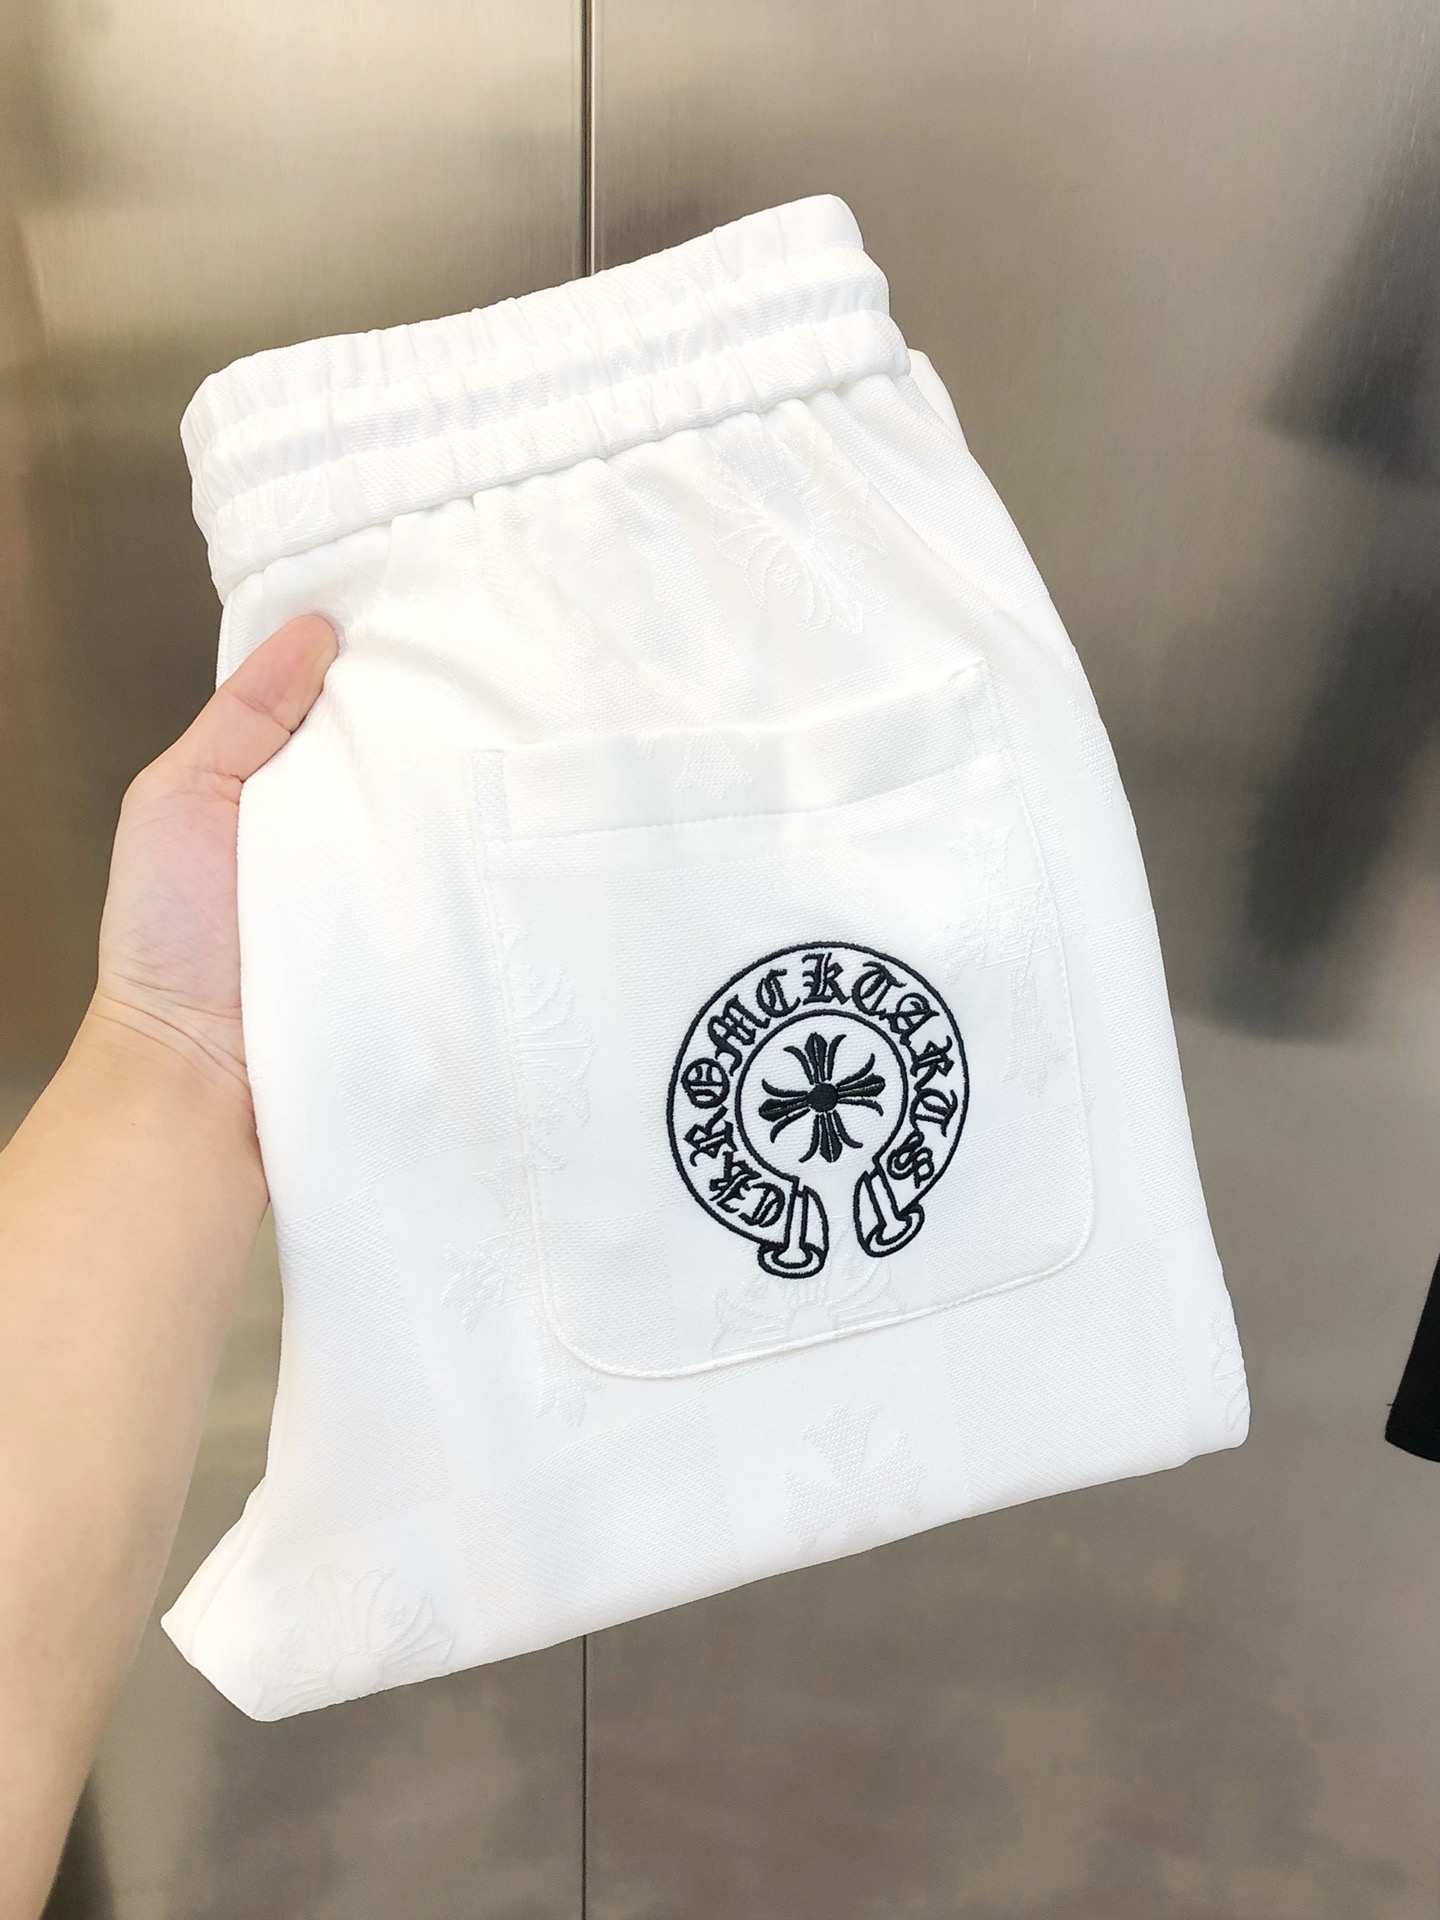 Chrome Hearts Clothing Pants & Trousers Black White Embroidery Men Cotton Fall/Winter Collection Fashion Casual